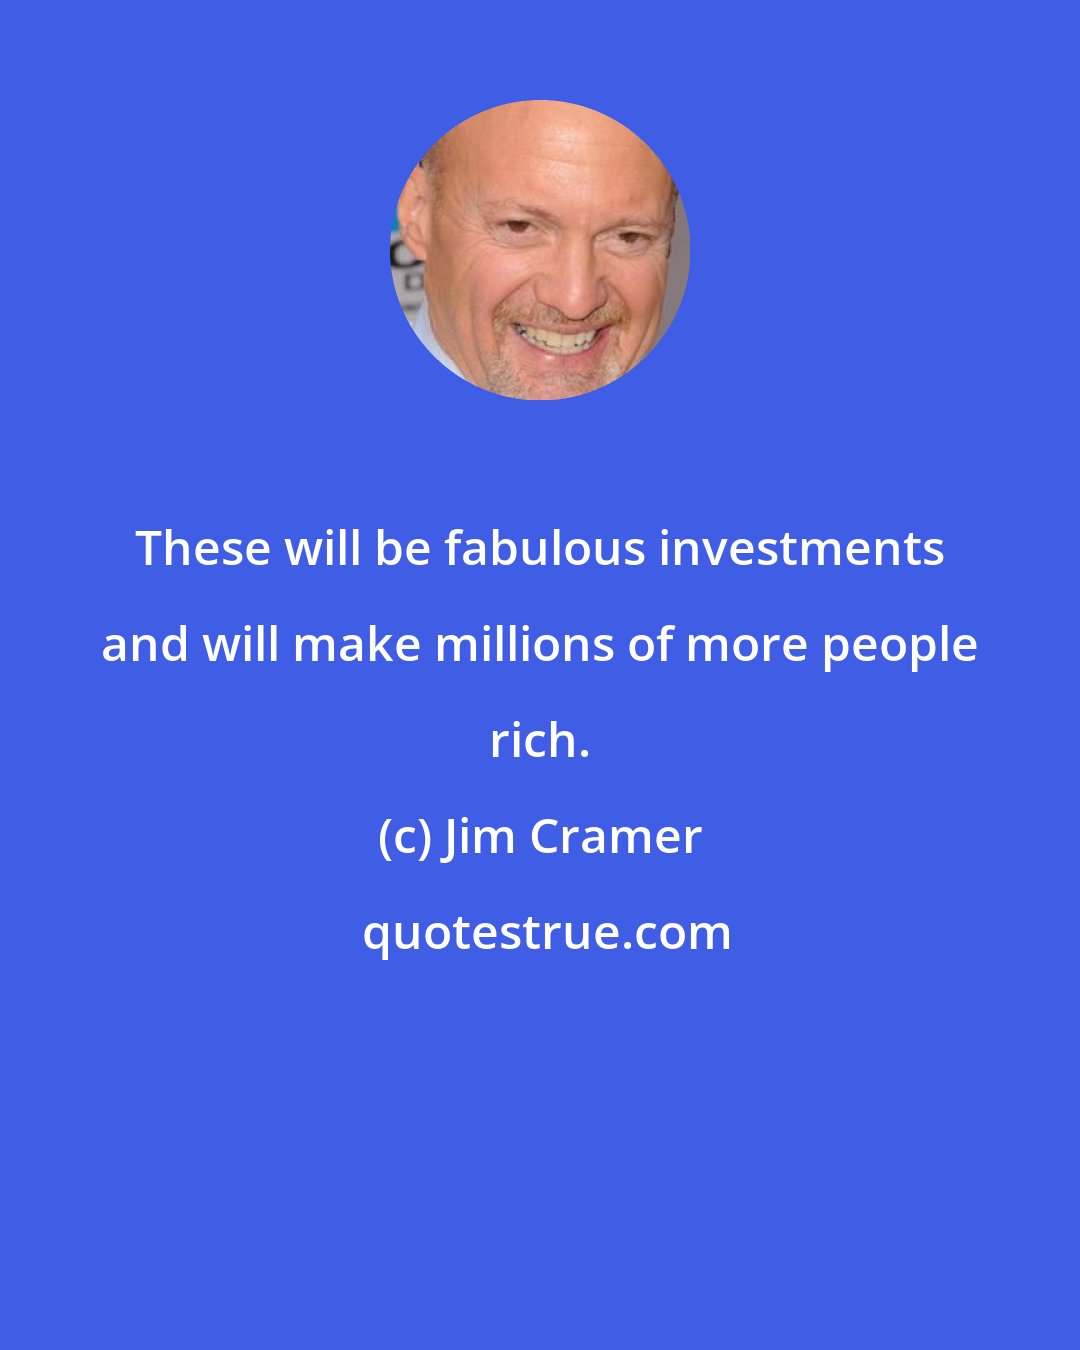 Jim Cramer: These will be fabulous investments and will make millions of more people rich.